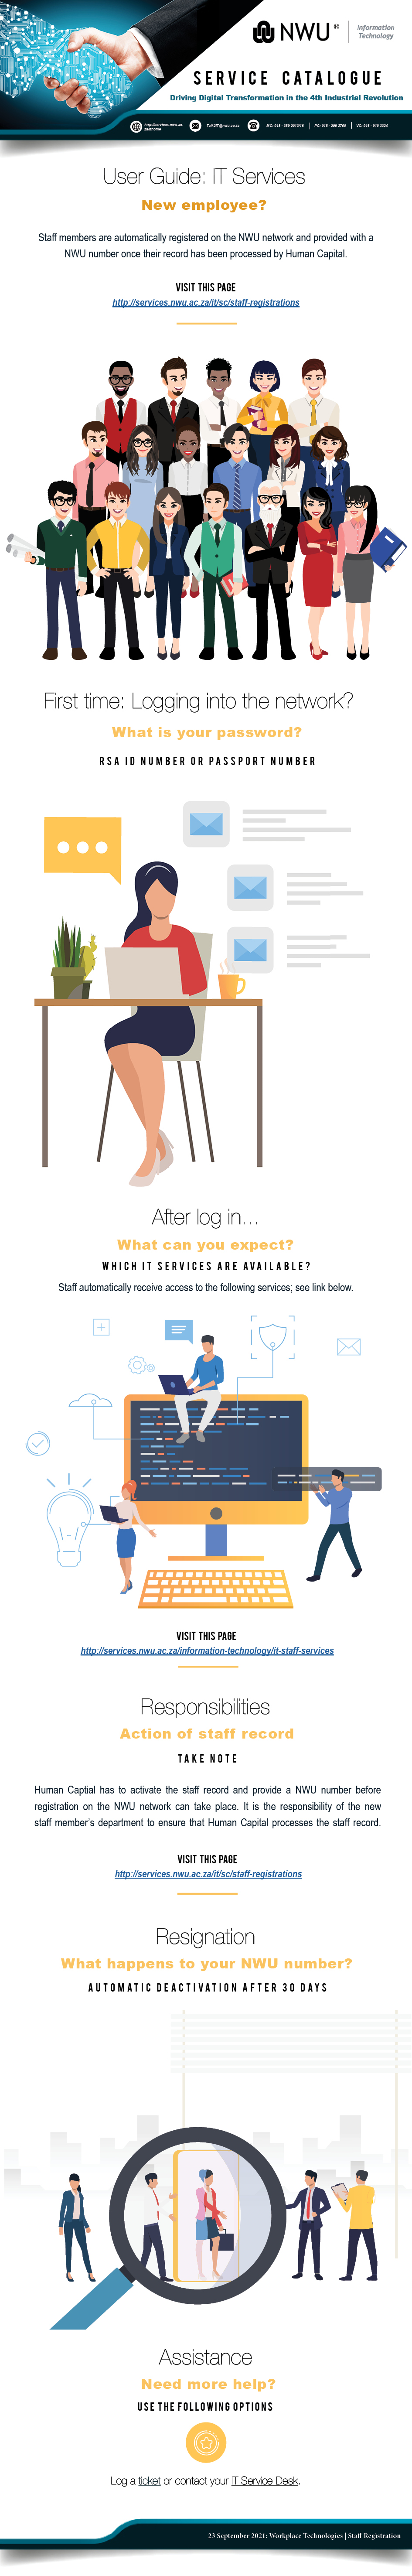 Infograhic expaining to new Employees about their passwords etc